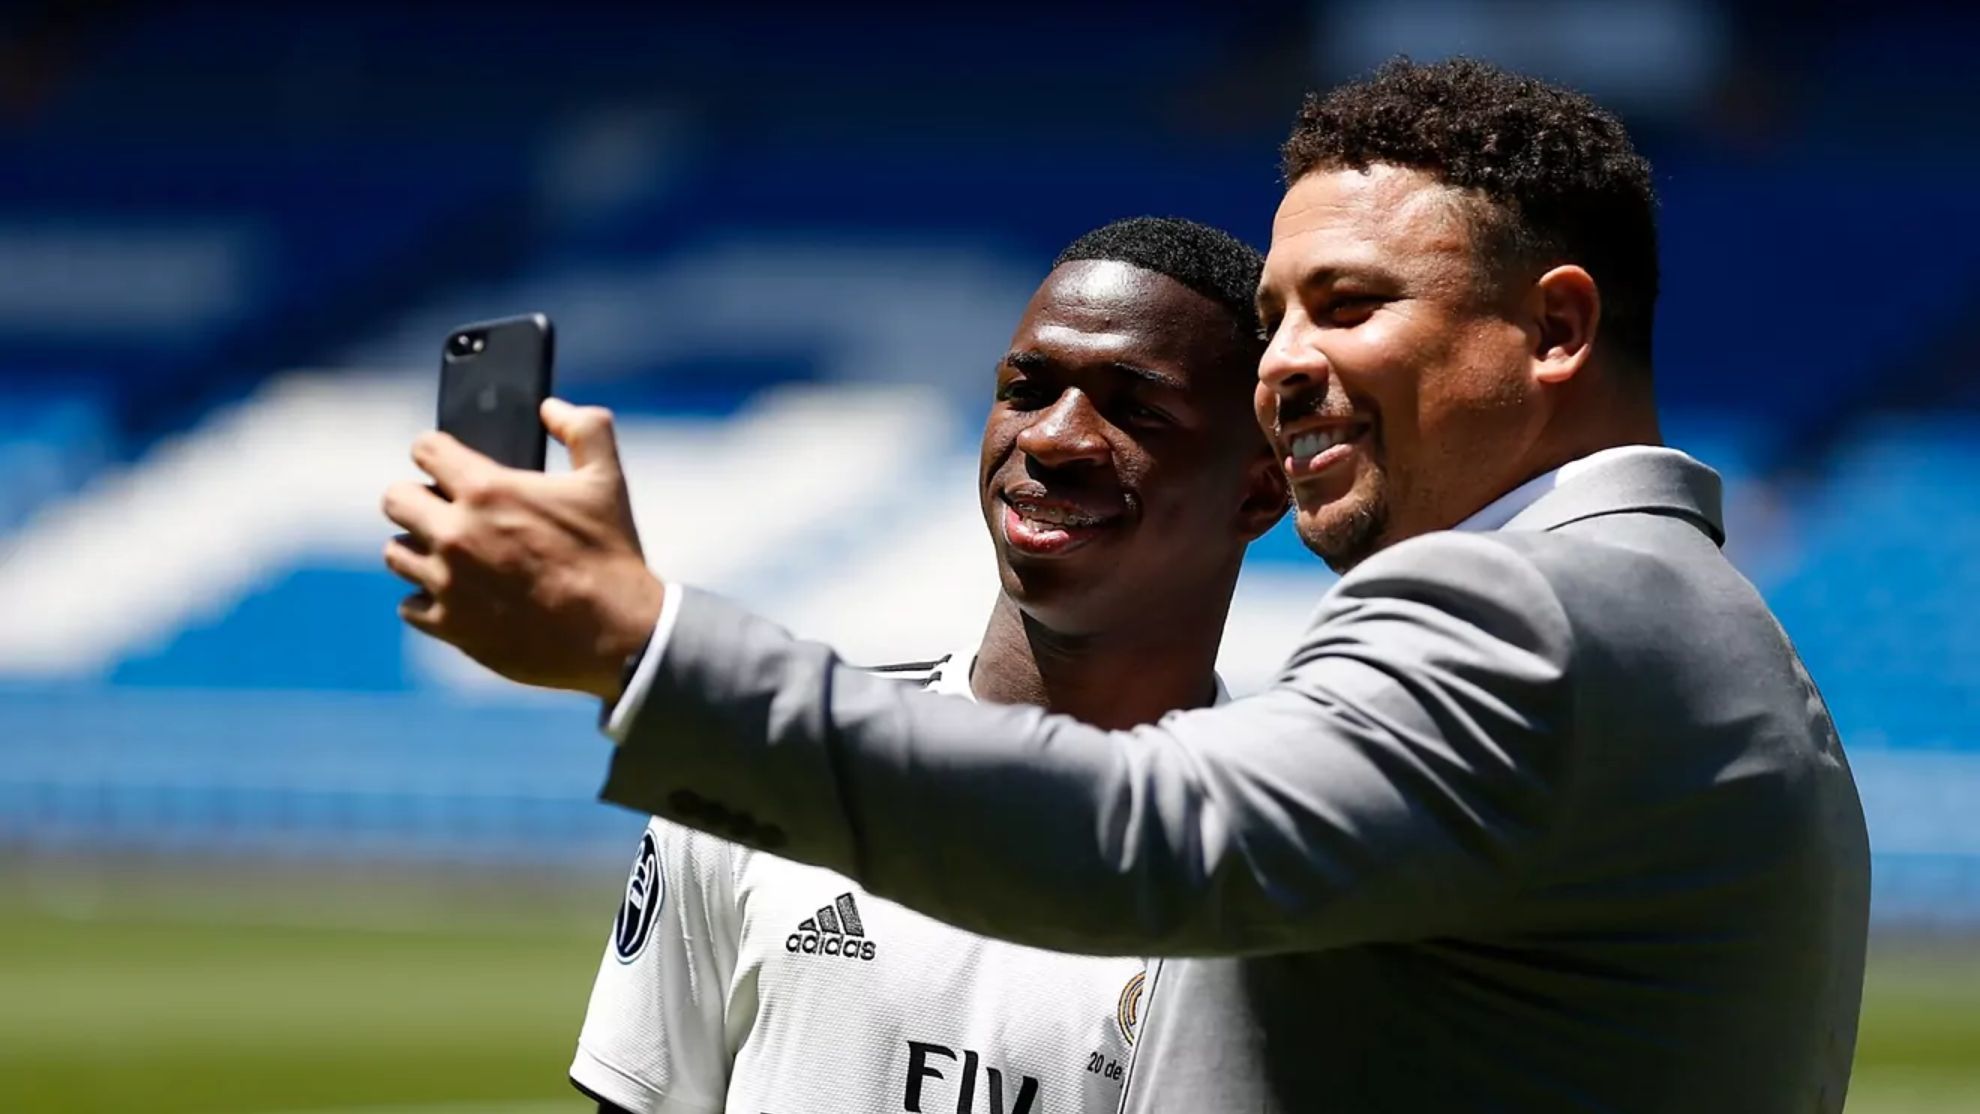 Vinicius and Ronaldo, together during his club presentation back in 2018.